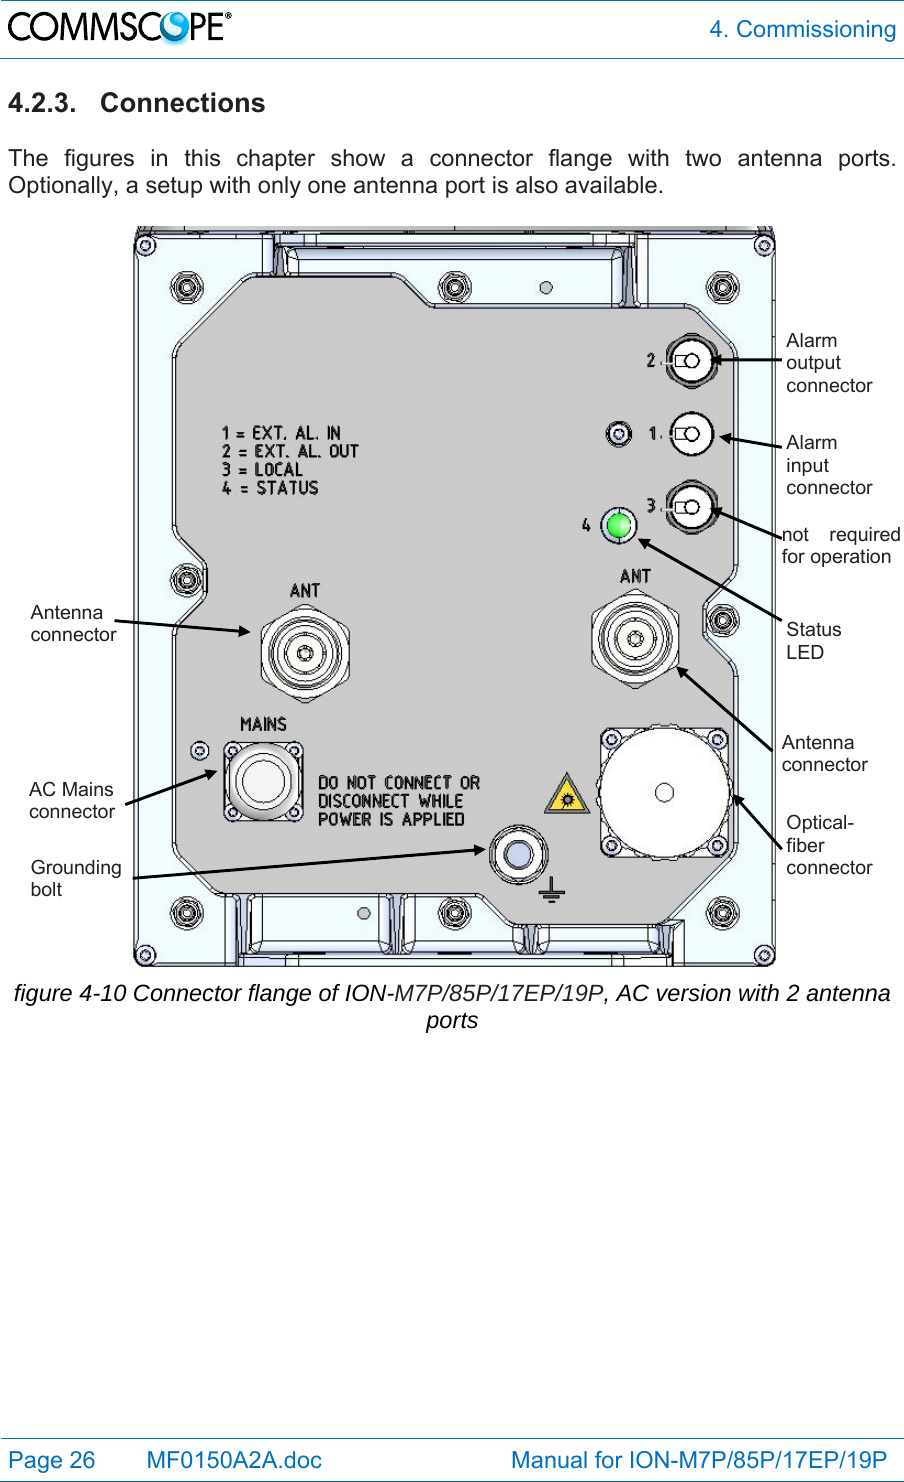  4. Commissioning Page 26   MF0150A2A.doc                             Manual for ION-M7P/85P/17EP/19P  4.2.3. Connections  The figures in this chapter show a connector flange with two antenna ports. Optionally, a setup with only one antenna port is also available.   figure 4-10 Connector flange of ION-M7P/85P/17EP/19P, AC version with 2 antenna ports AC Mains connector Grounding bolt Optical-fiber connector Status LED Antenna connector  Alarm input connector Alarm output connector not requiredfor operationAntenna connector 